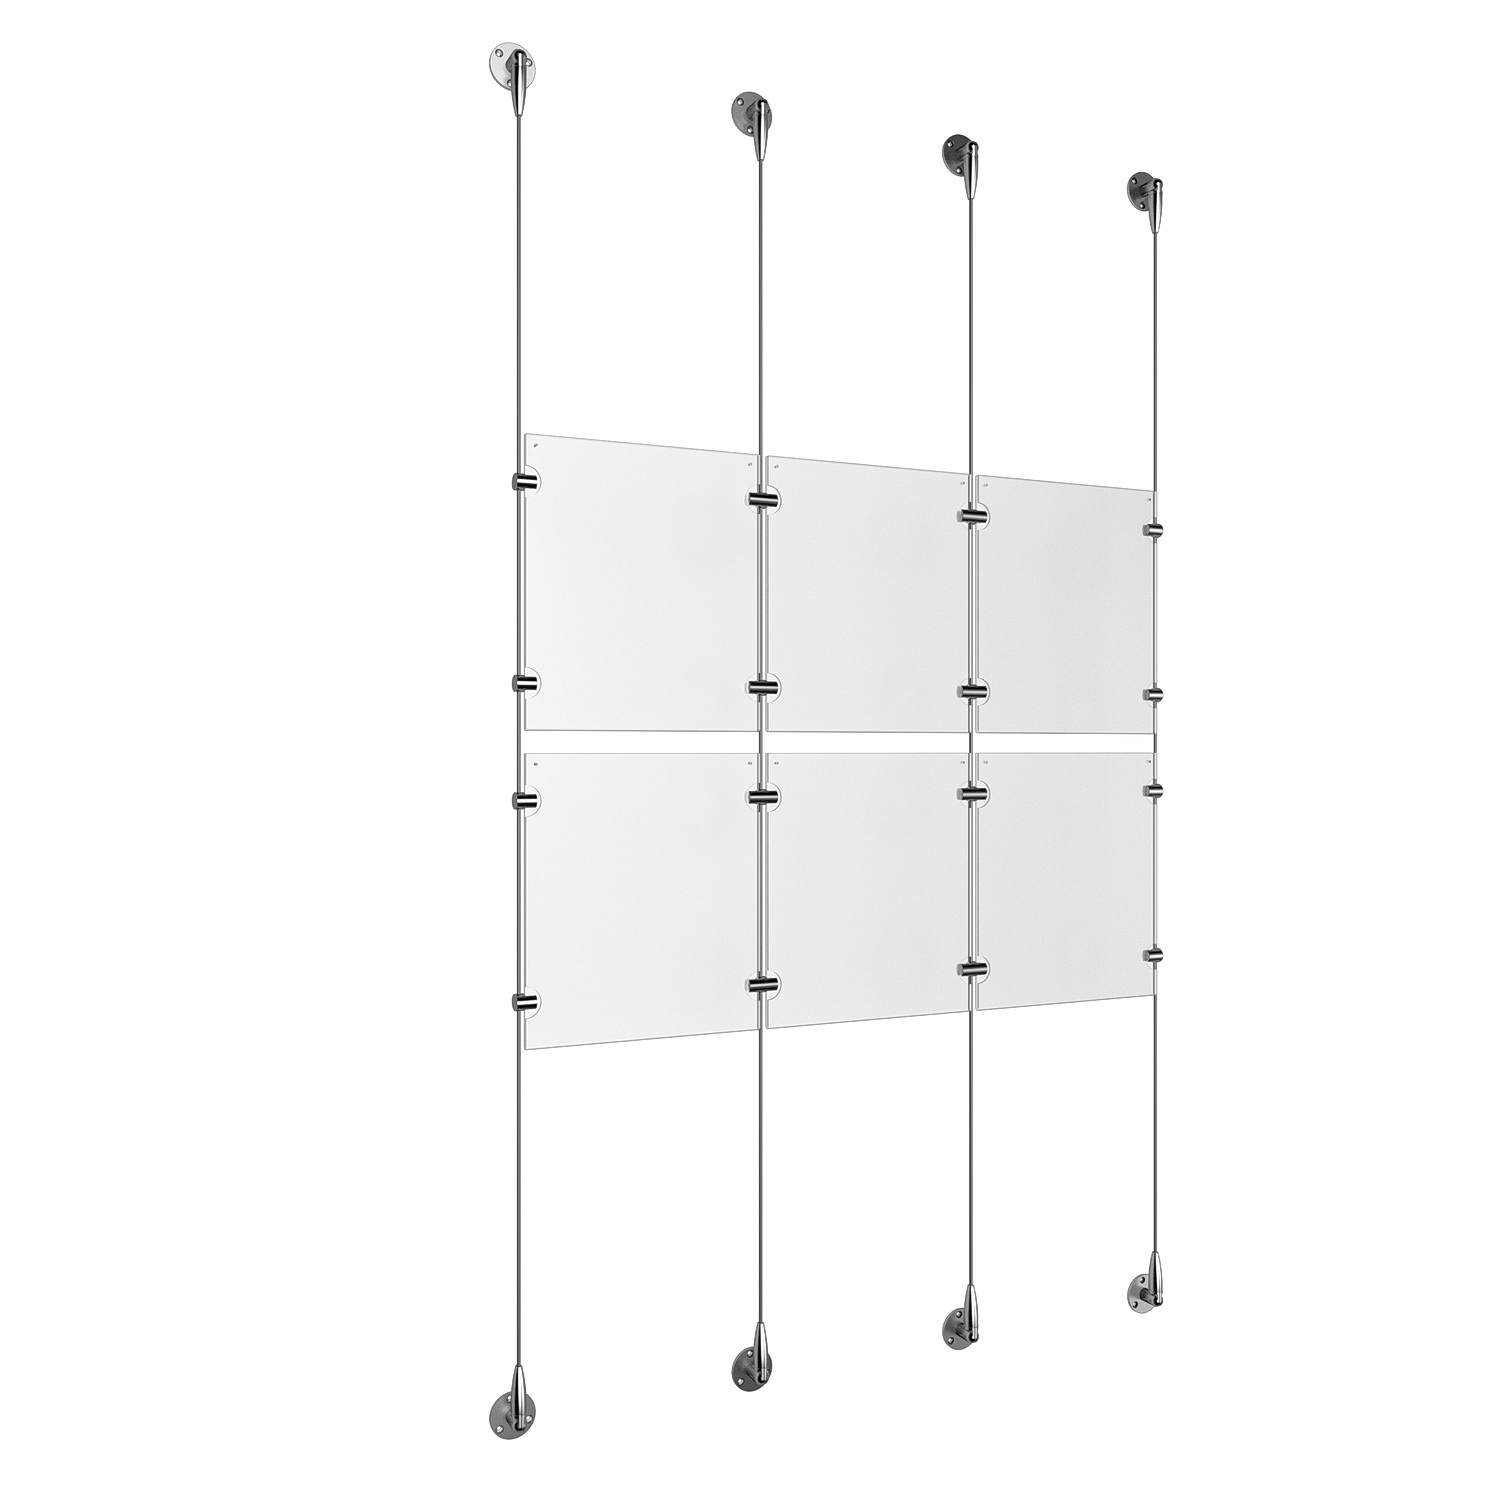 (6) 8-1/2'' Width x 11'' Height Clear Acrylic Frame & (4) Stainless Steel Satin Brushed Adjustable Angle Signature 1/8'' Cable Systems with (8) Single-Sided Panel Grippers (8) Double-Sided Panel Grippers